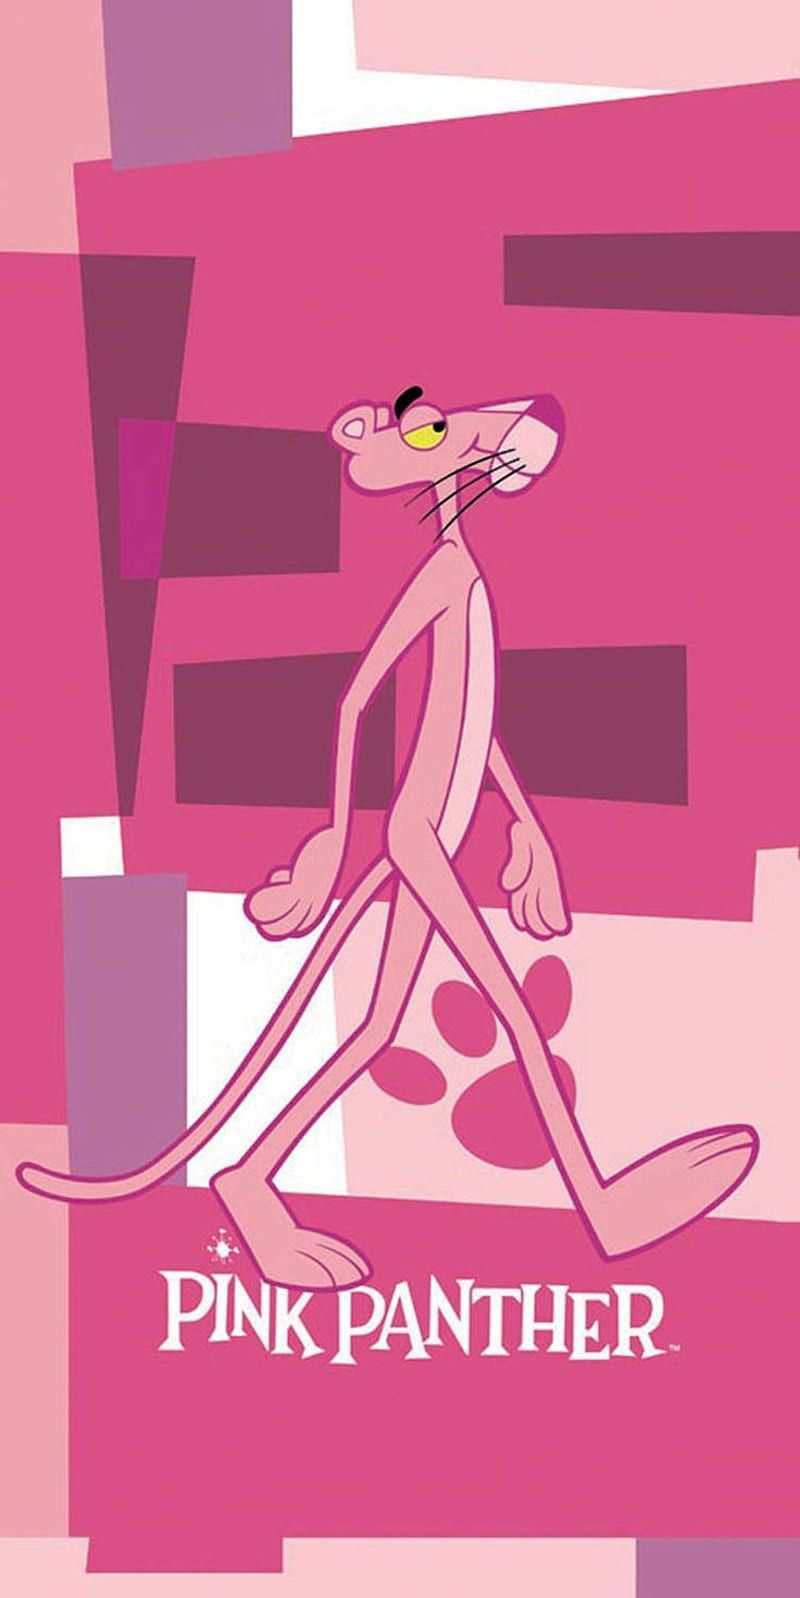 Pink panther wallpaper by johnny5 - Pink Panther